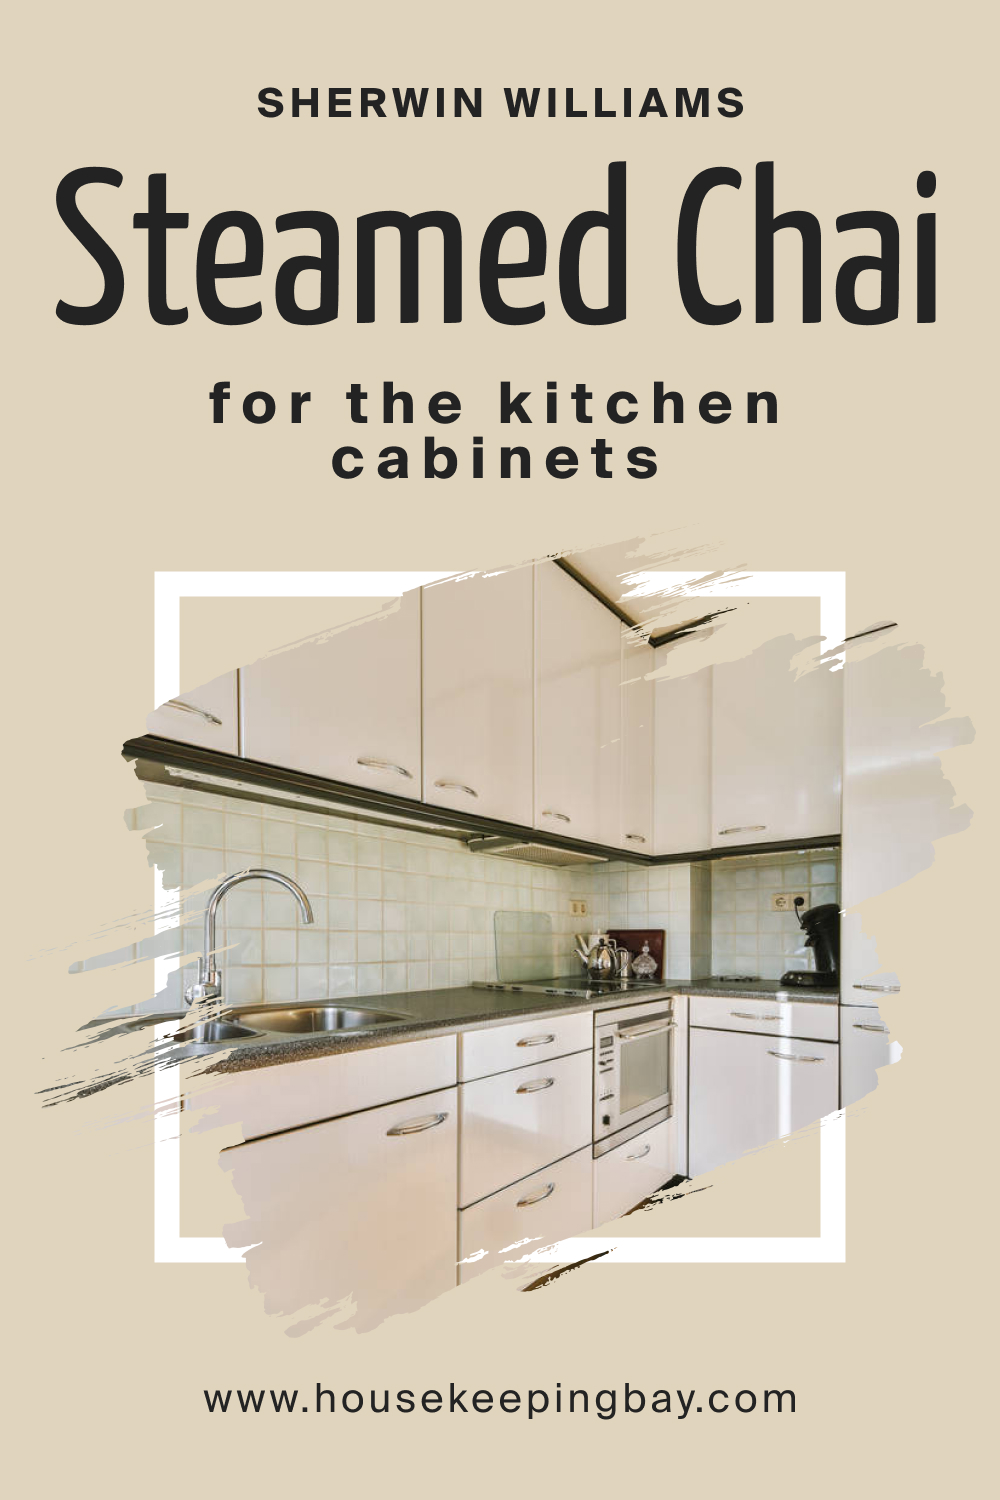 Sherwin Williams. SW 9509 Steamed Chai For the Kitchen Cabinets